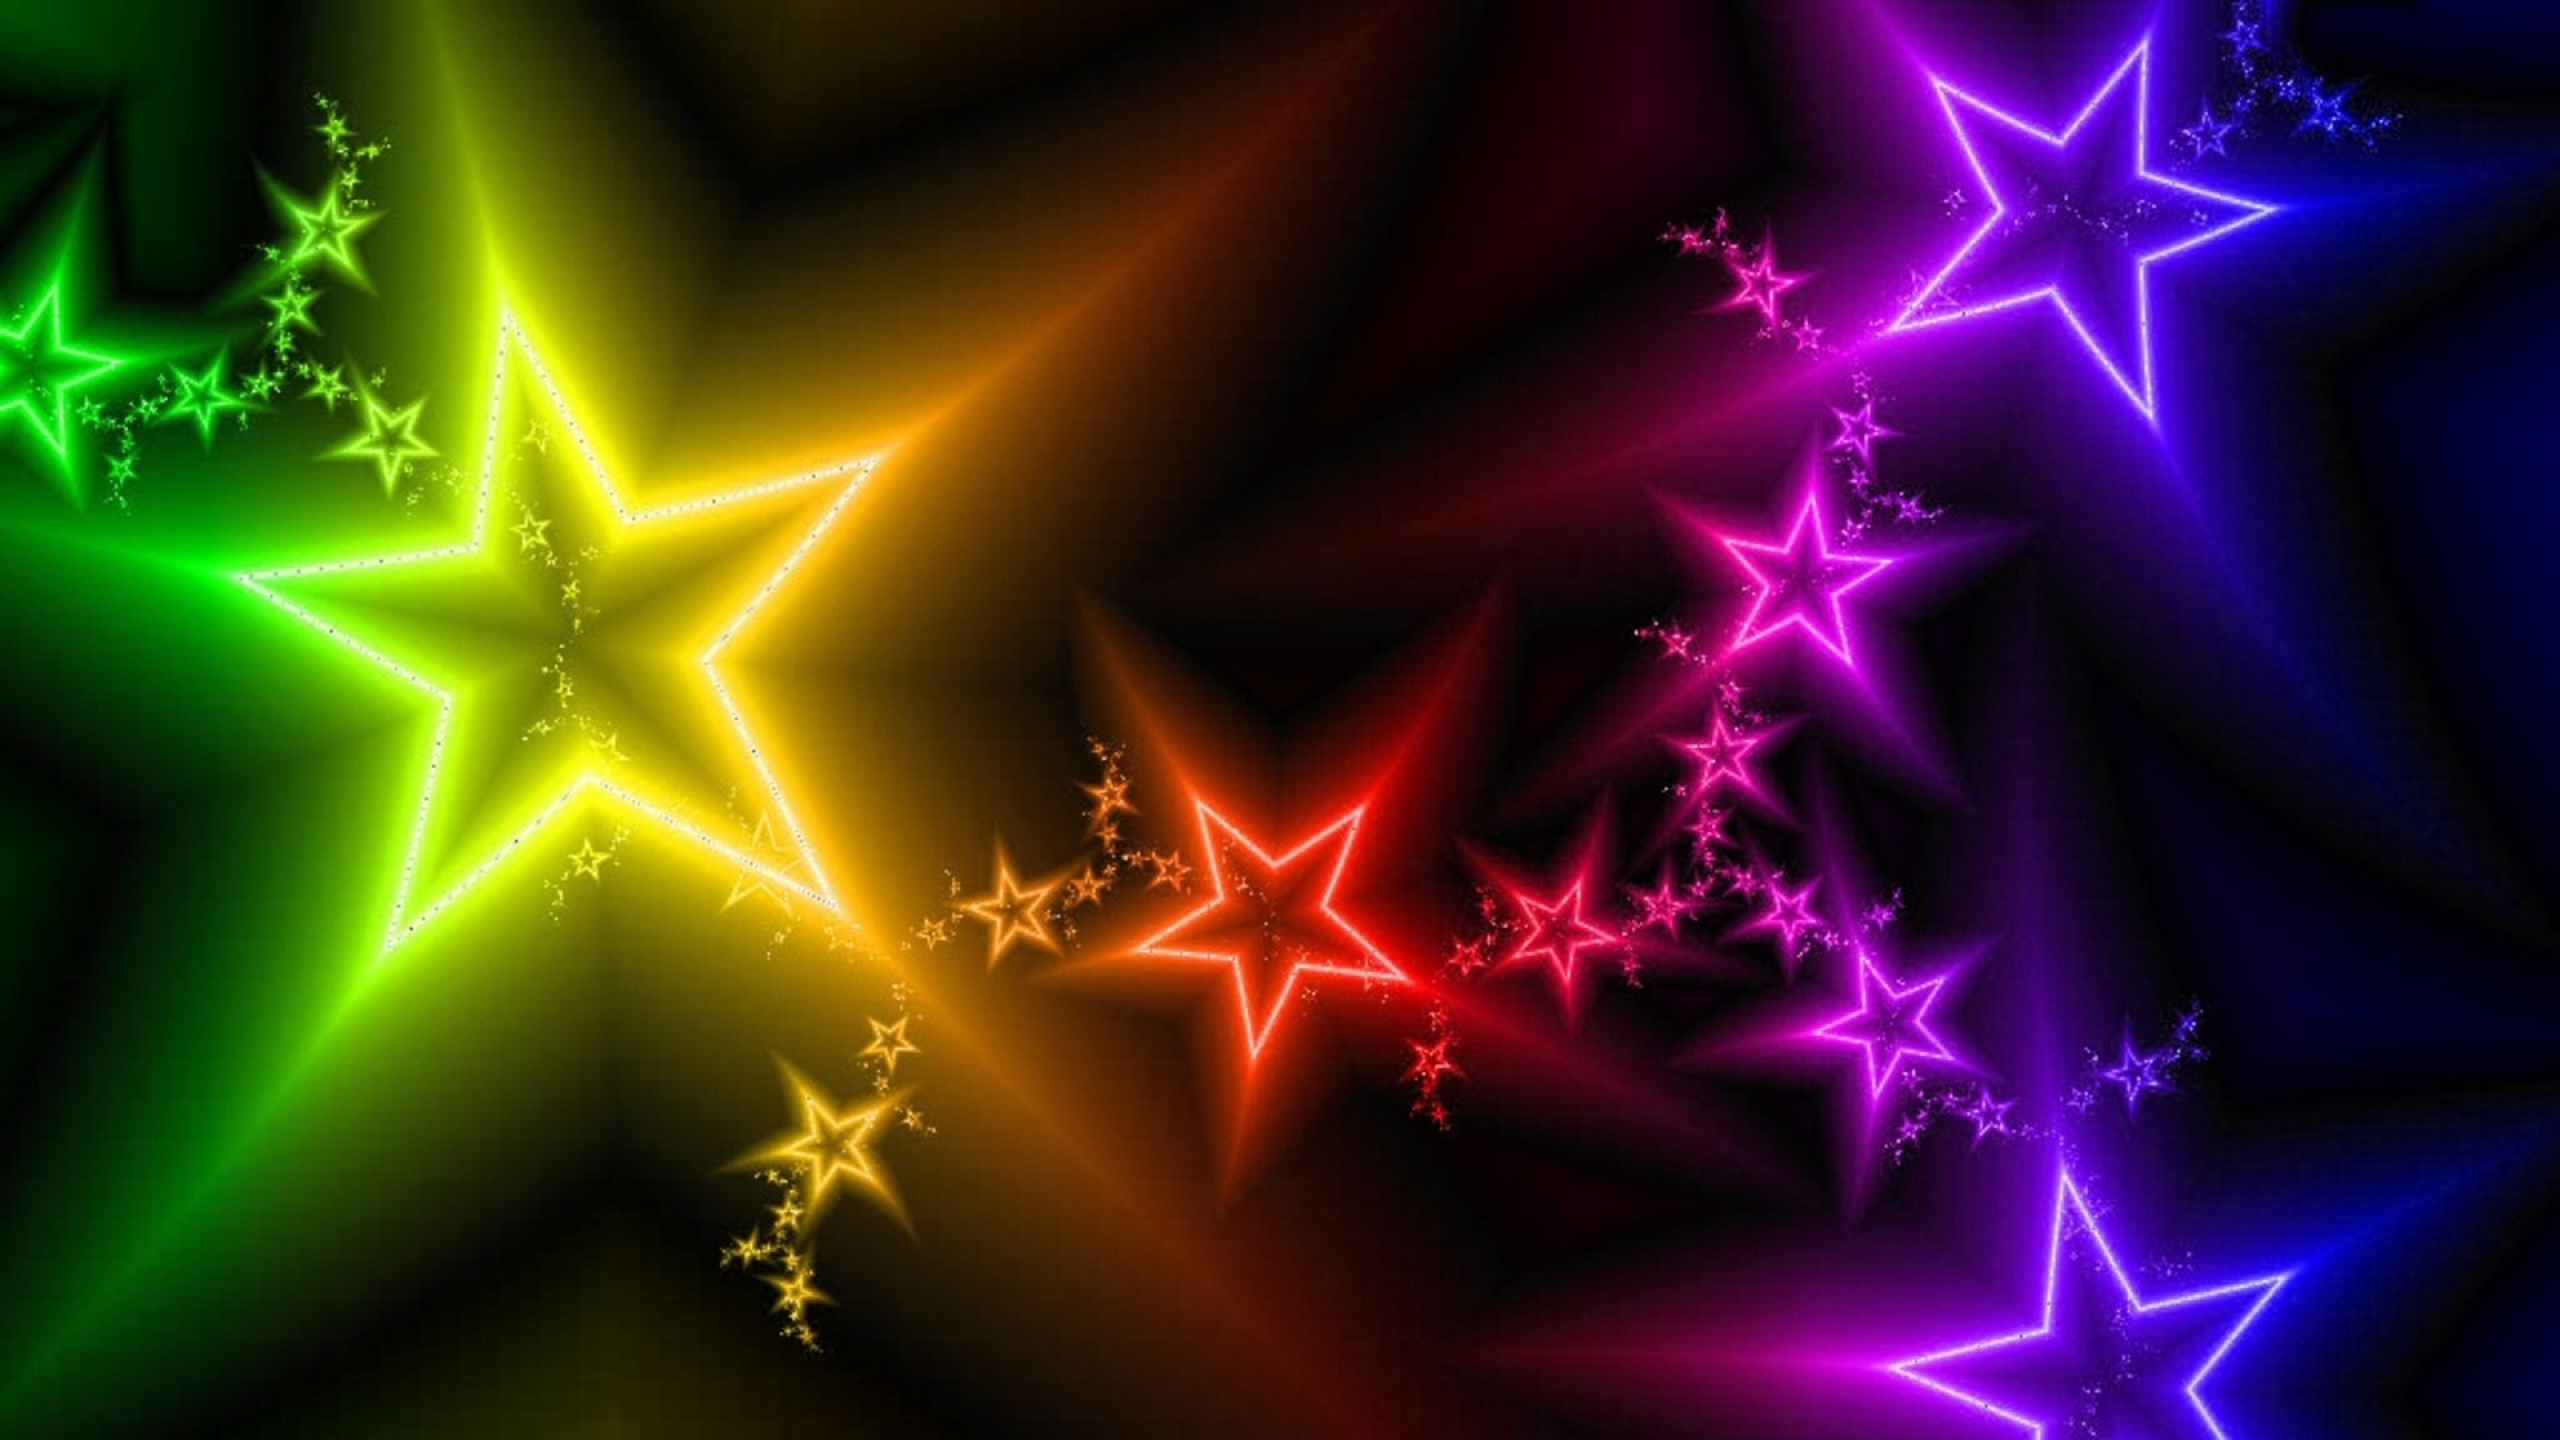 Abstract light color wallpaper